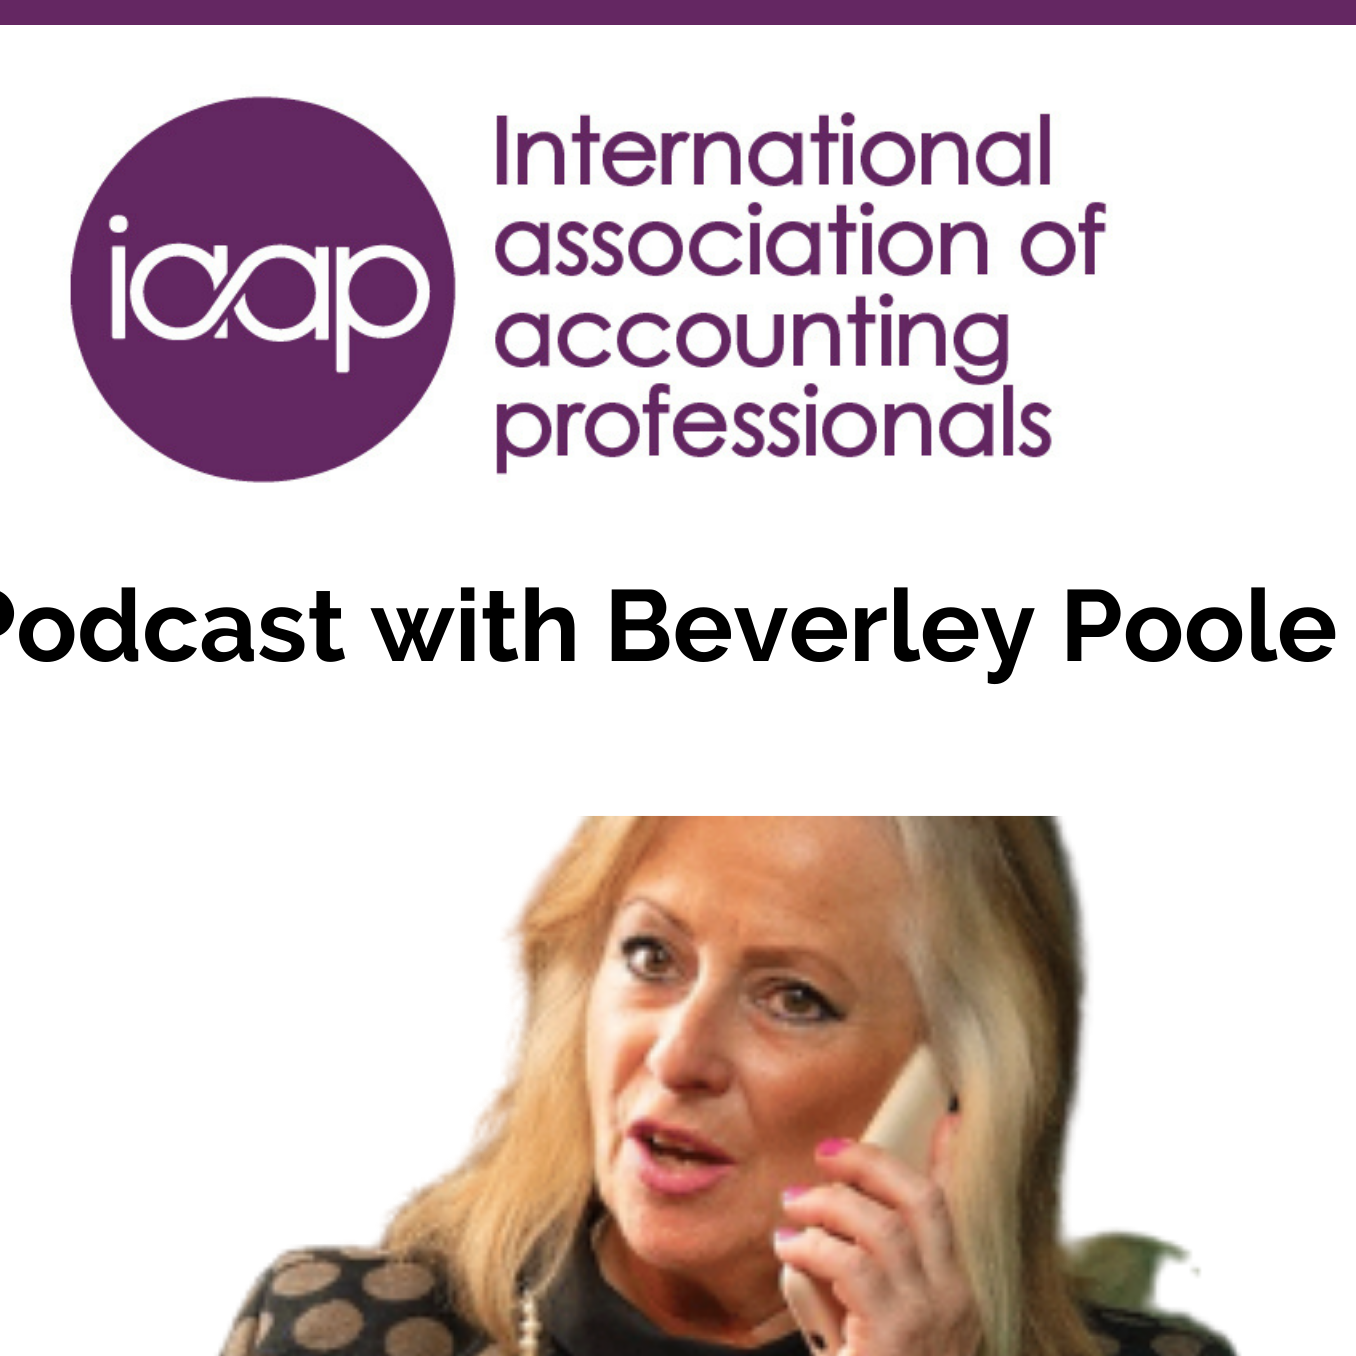 Beverley Poole - How to Communicate your Way to Success